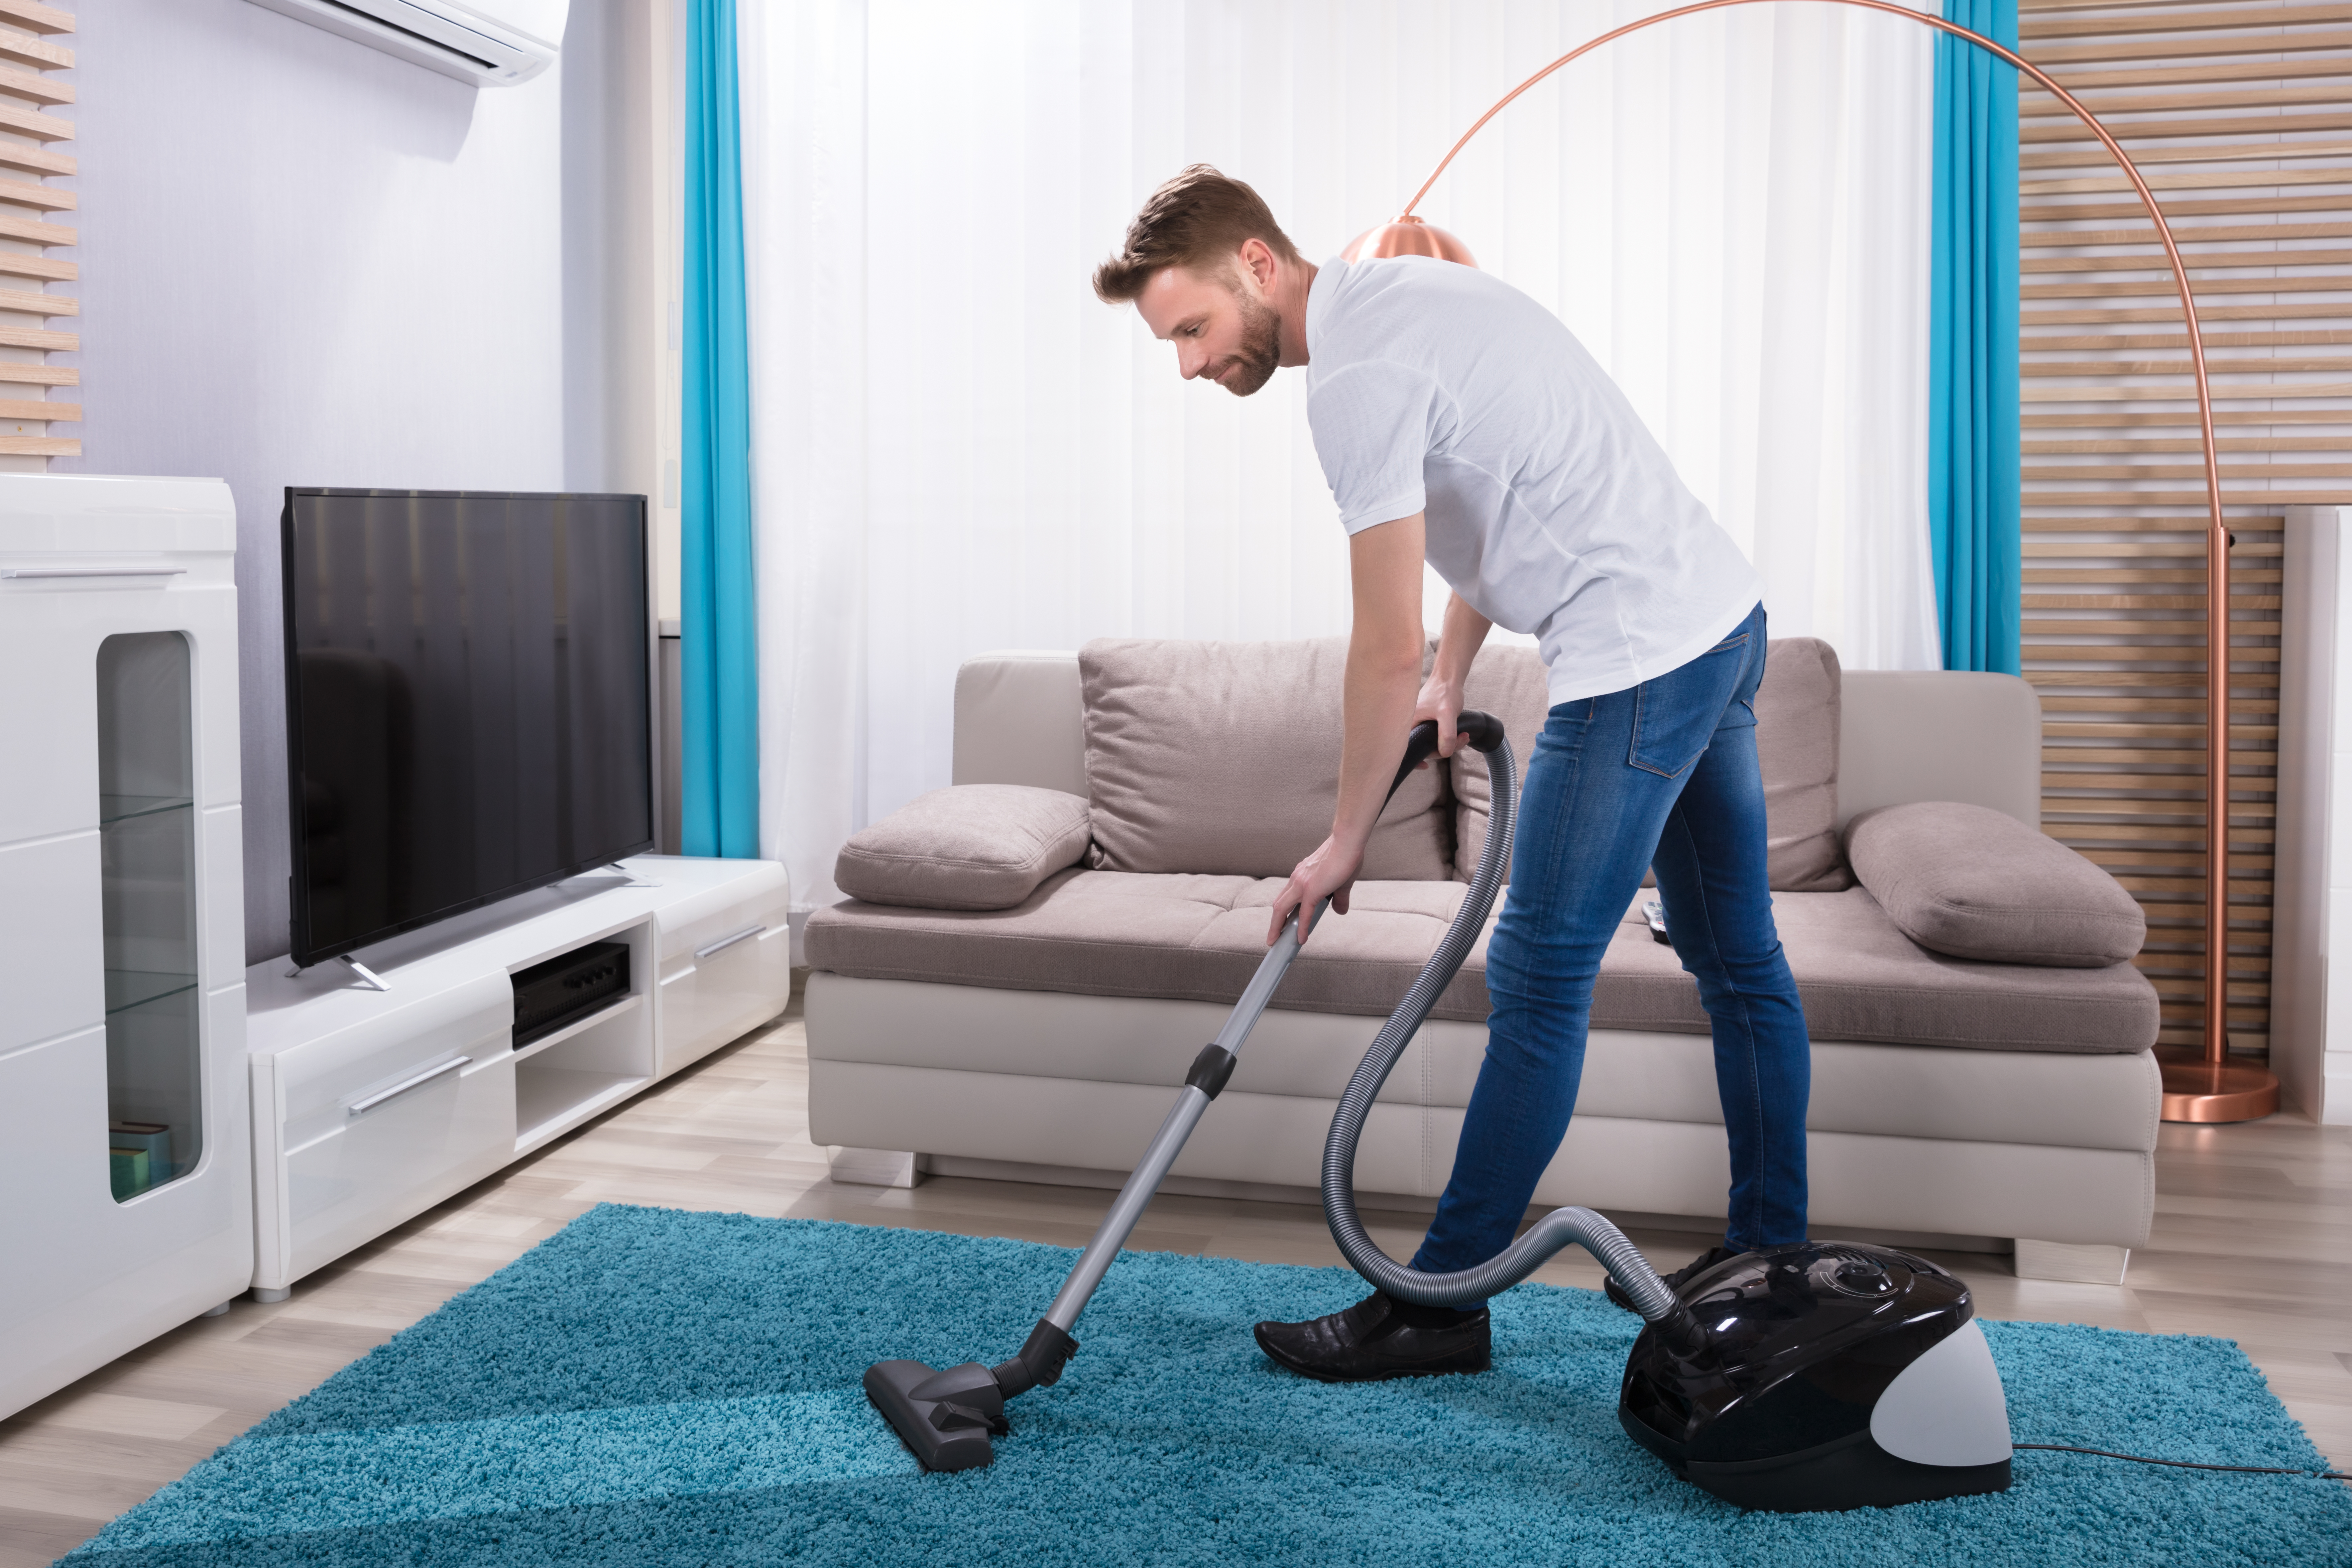 A man using a vacuum cleaner | Source: Shutterstock